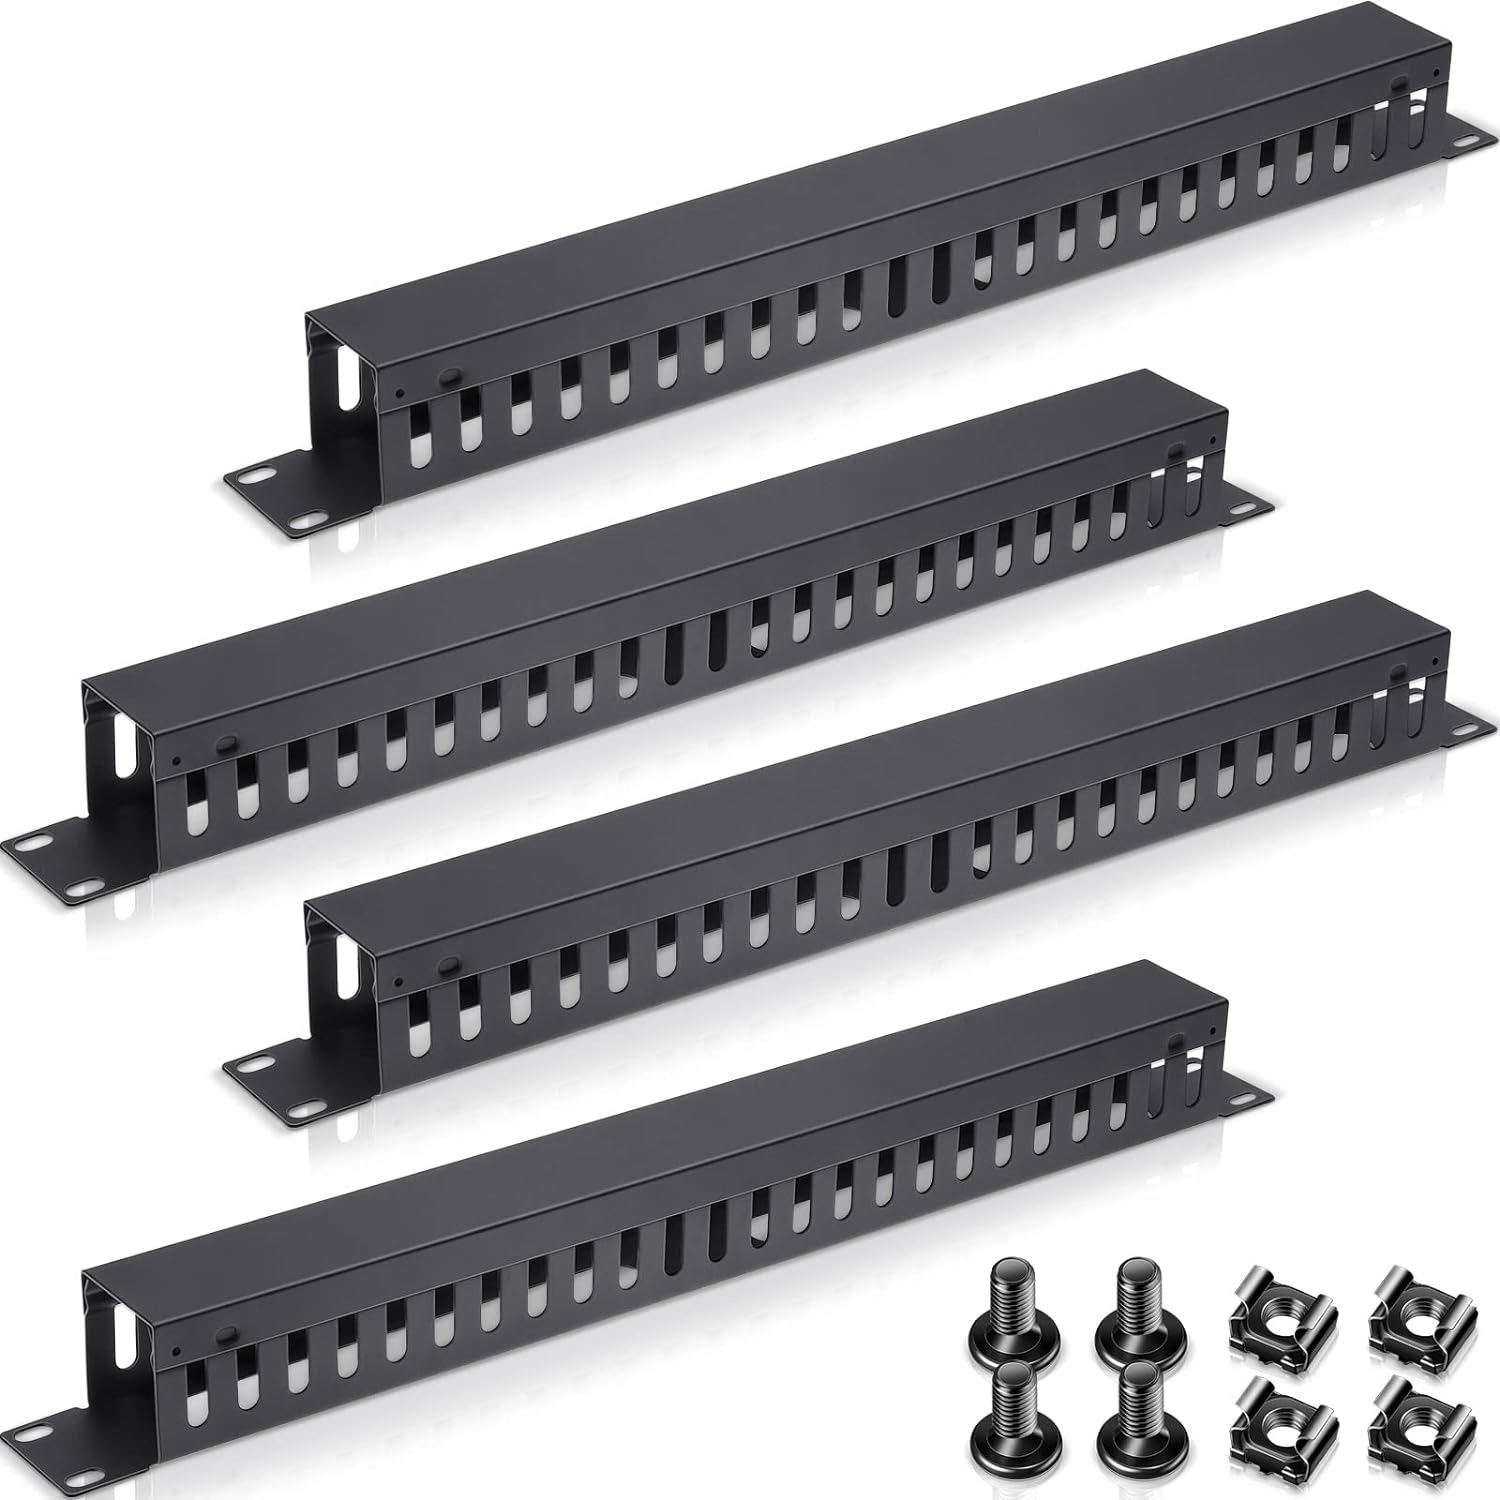 4 Pack 1U 19 Inch Cable Manager 24 Slot Horizontal Rack Mount Wire Management Se